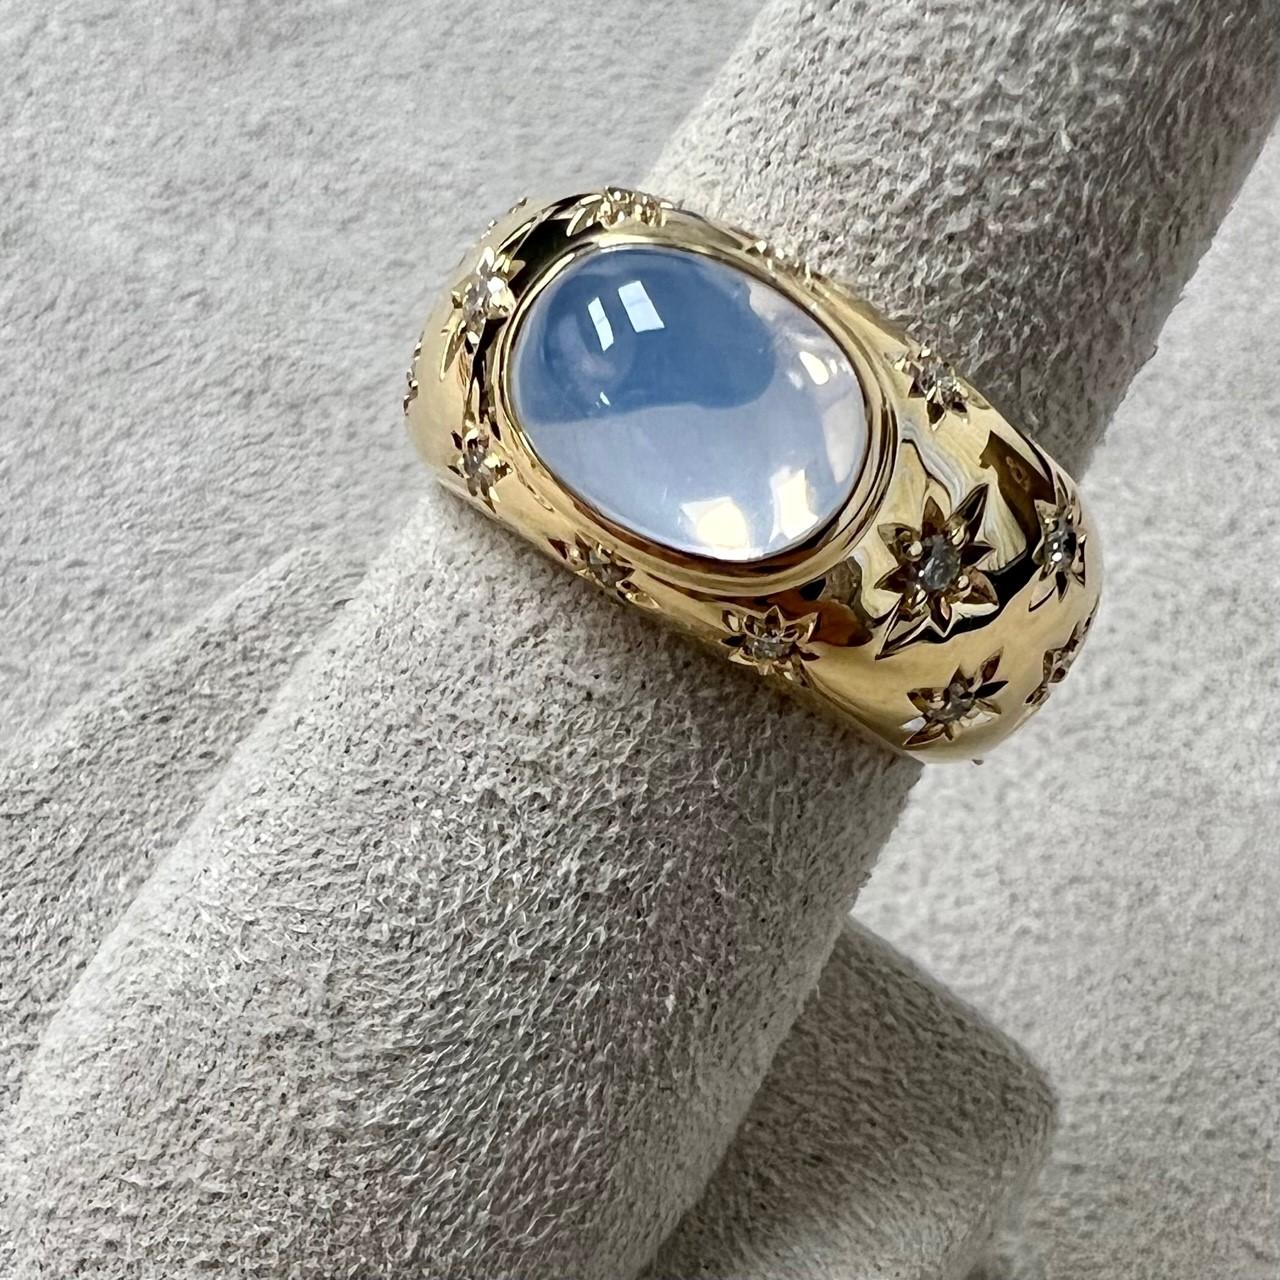 Created in 18 karat yellow gold
Moon quartz 2 carats approx.
Diamonds 0.20 carat approx.
Ring size US 7, can be sized as per request
Limited edition

Exquisitely crafted in 18 karat yellow gold, this limited edition ring features an exquisite moon